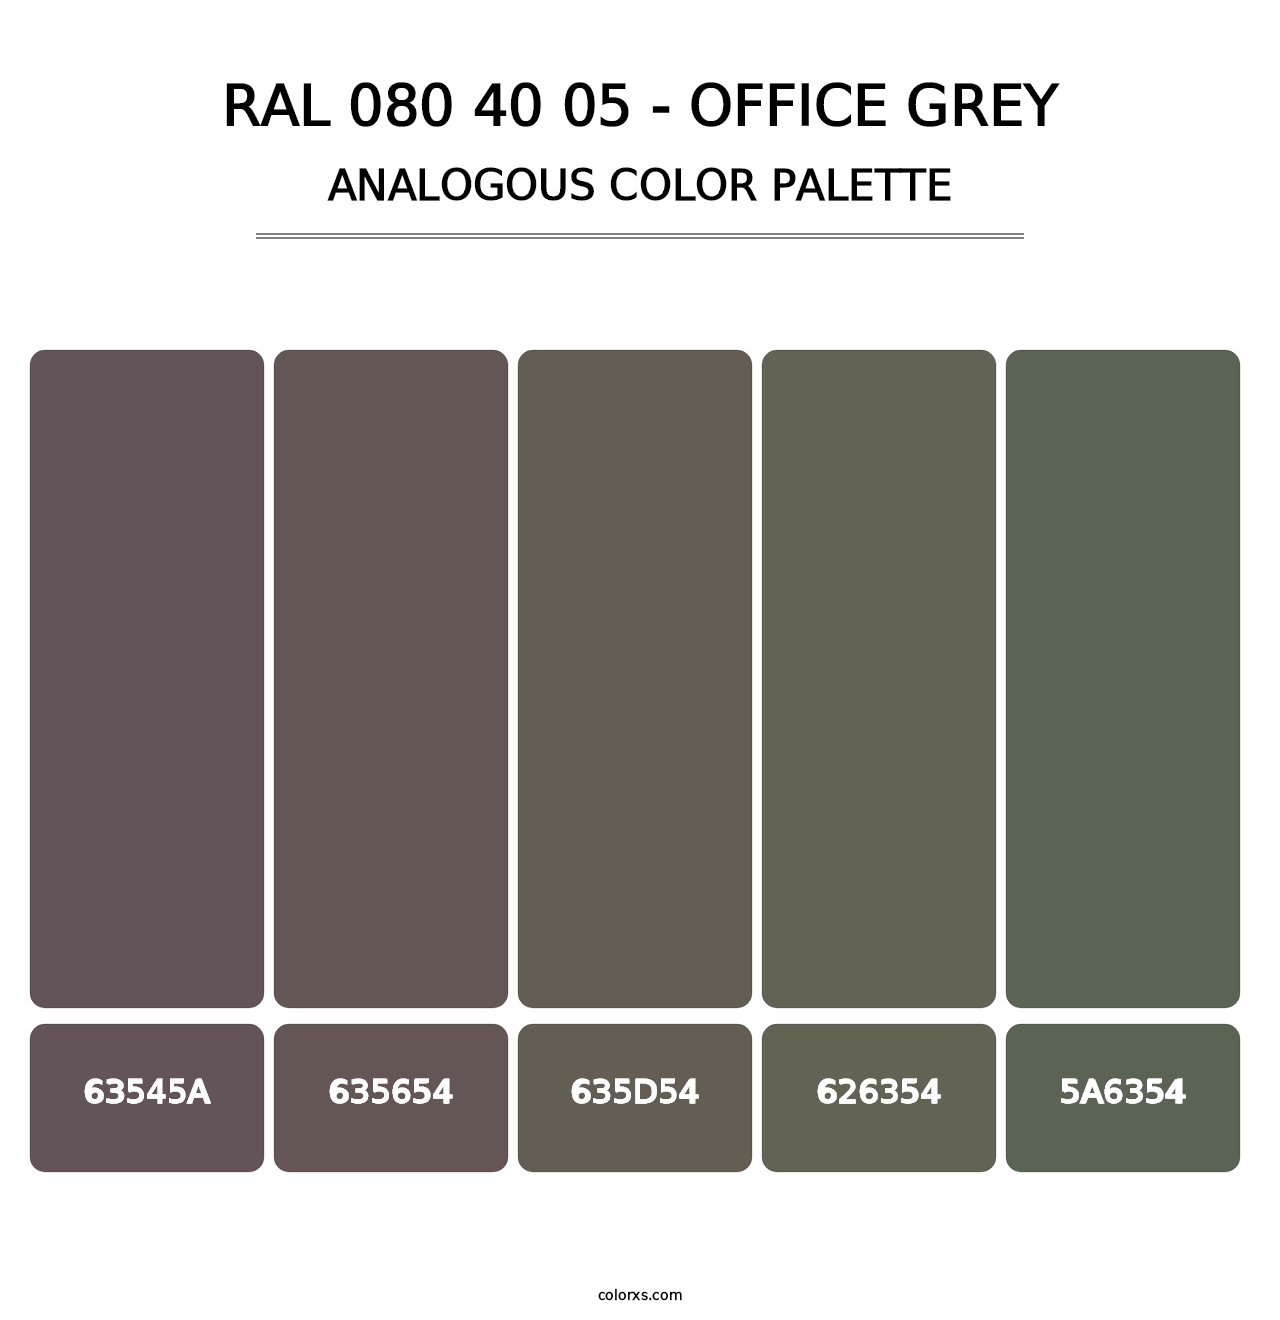 RAL 080 40 05 - Office Grey - Analogous Color Palette